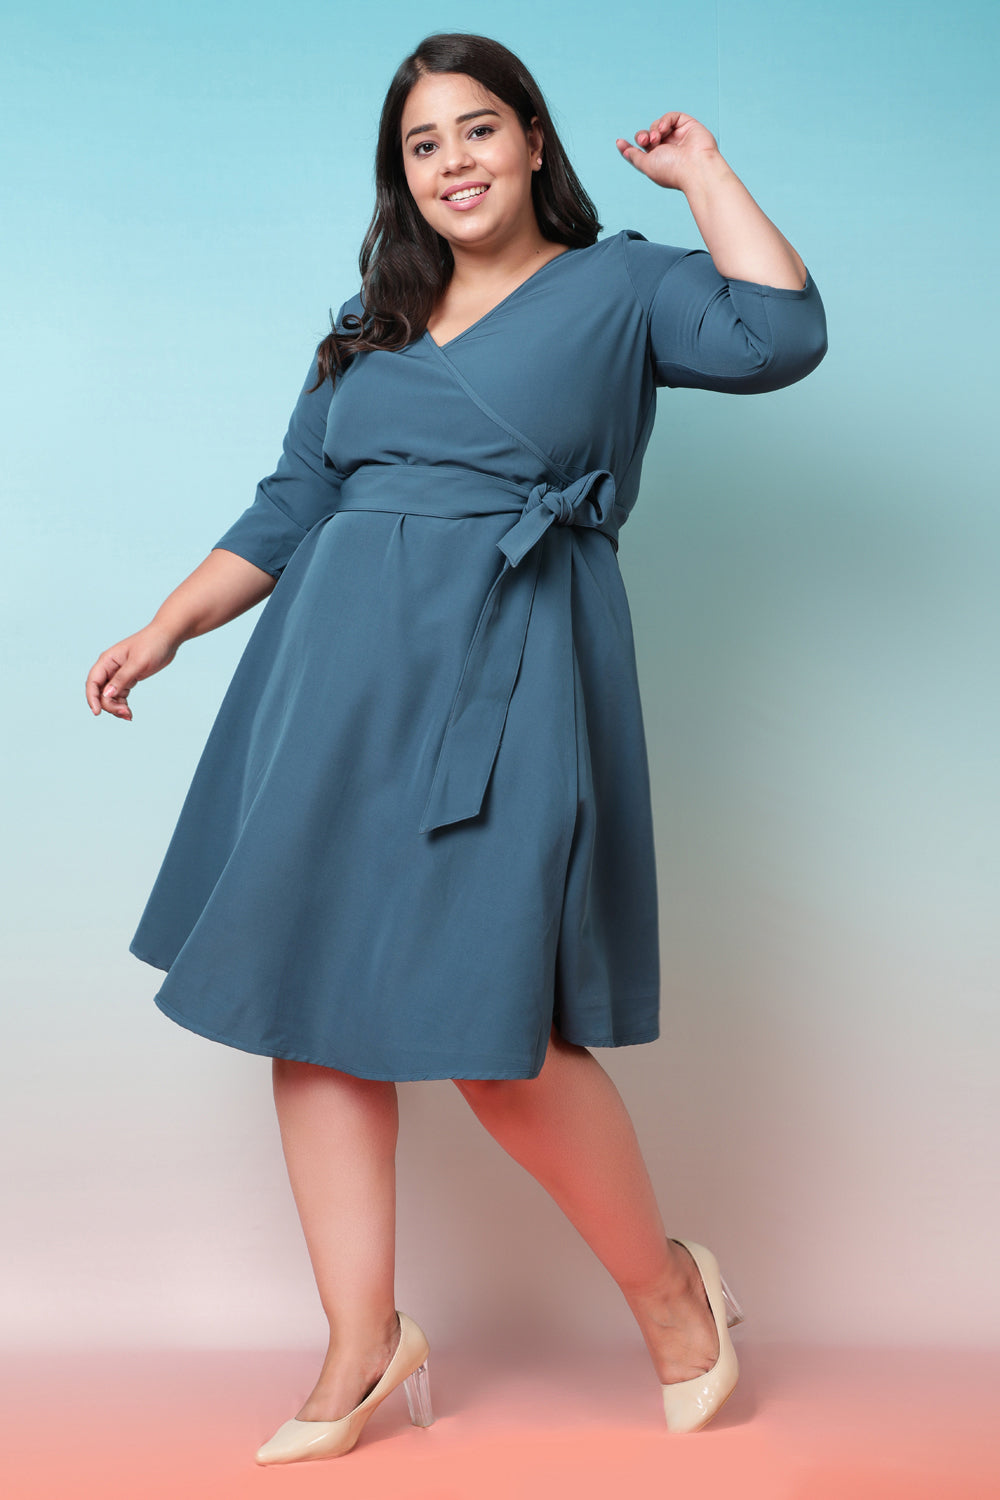 Plus Size Girls One Piece Dress Ideas for New Year's Eve Party